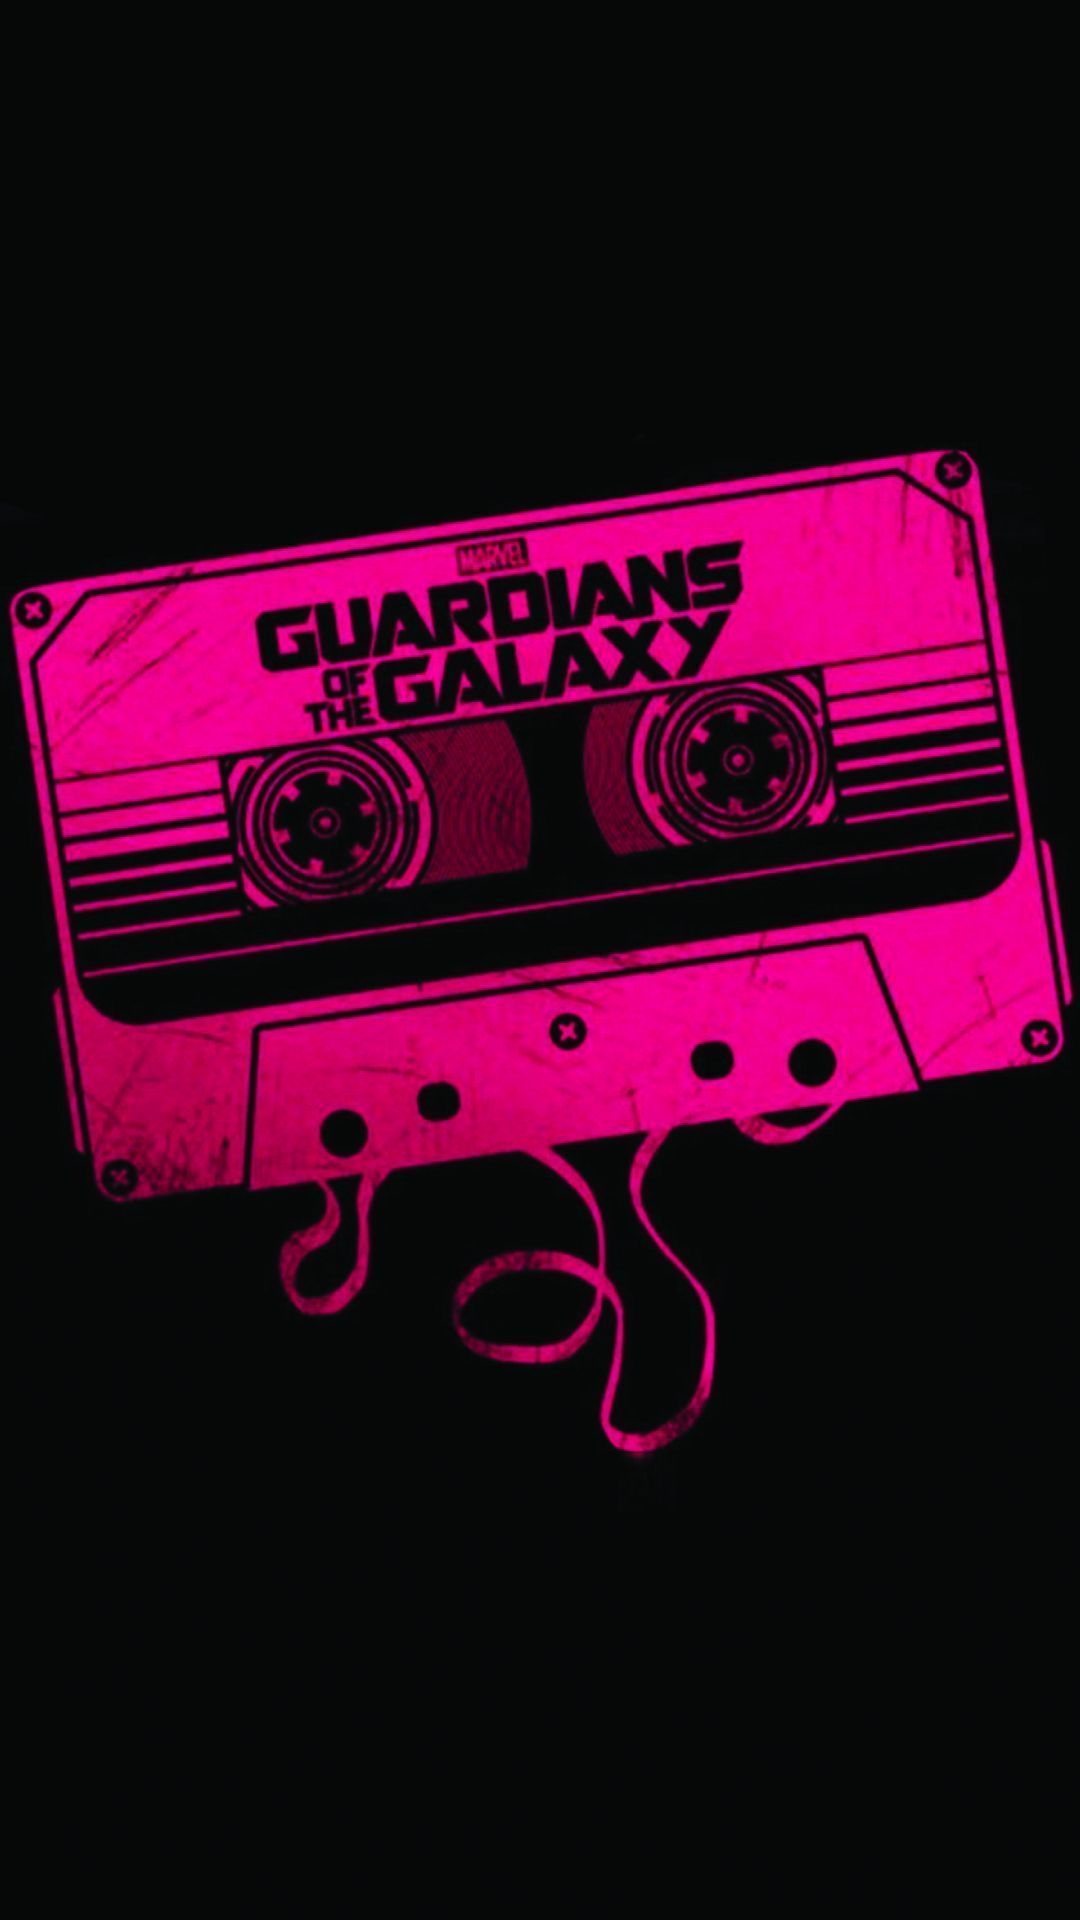 IPhone Wallpaper HD Guardians of the Galaxy with high-resolution 1080x1920 pixel. You can use this wallpaper for your iPhone 5, 6, 7, 8, X, XS, XR backgrounds, Mobile Screensaver, or iPad Lock Screen - Guardians of the Galaxy